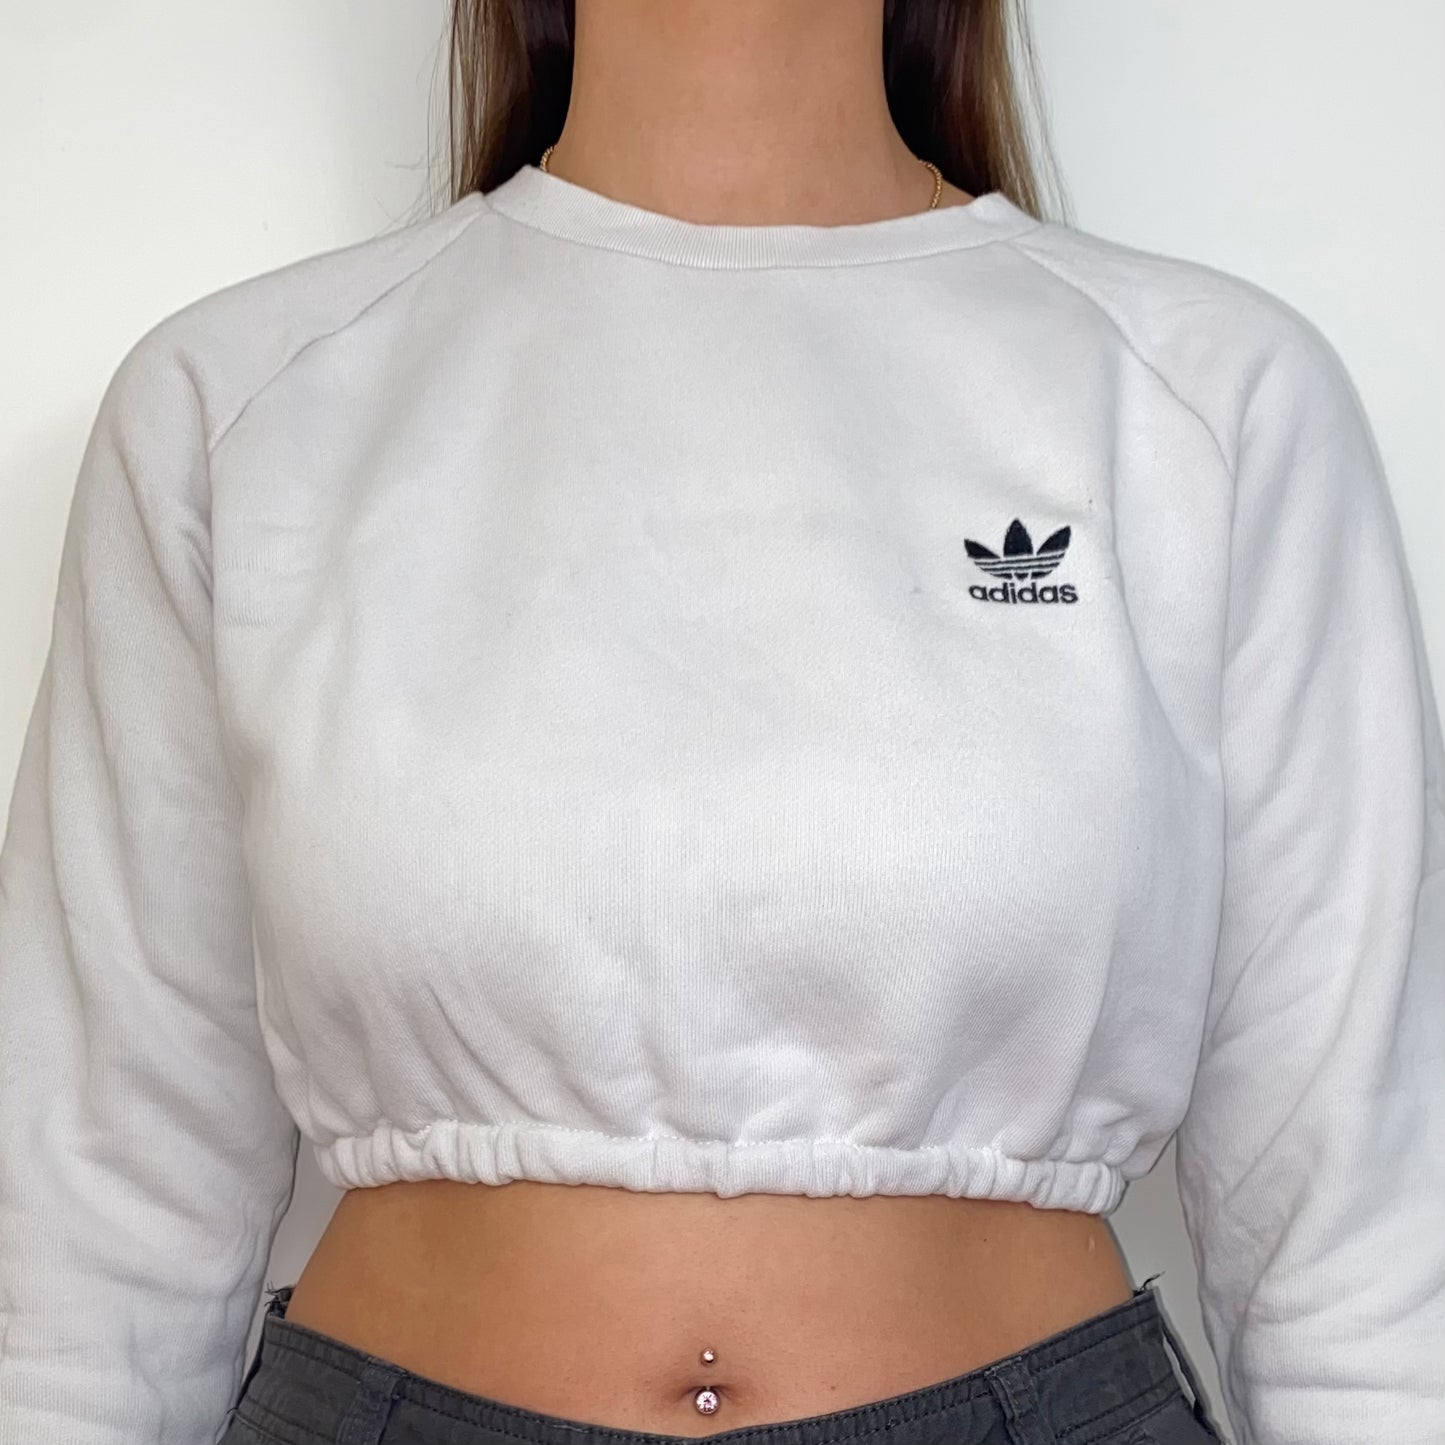 close up of white cropped sweatshirt with black adidas logo shown on a model